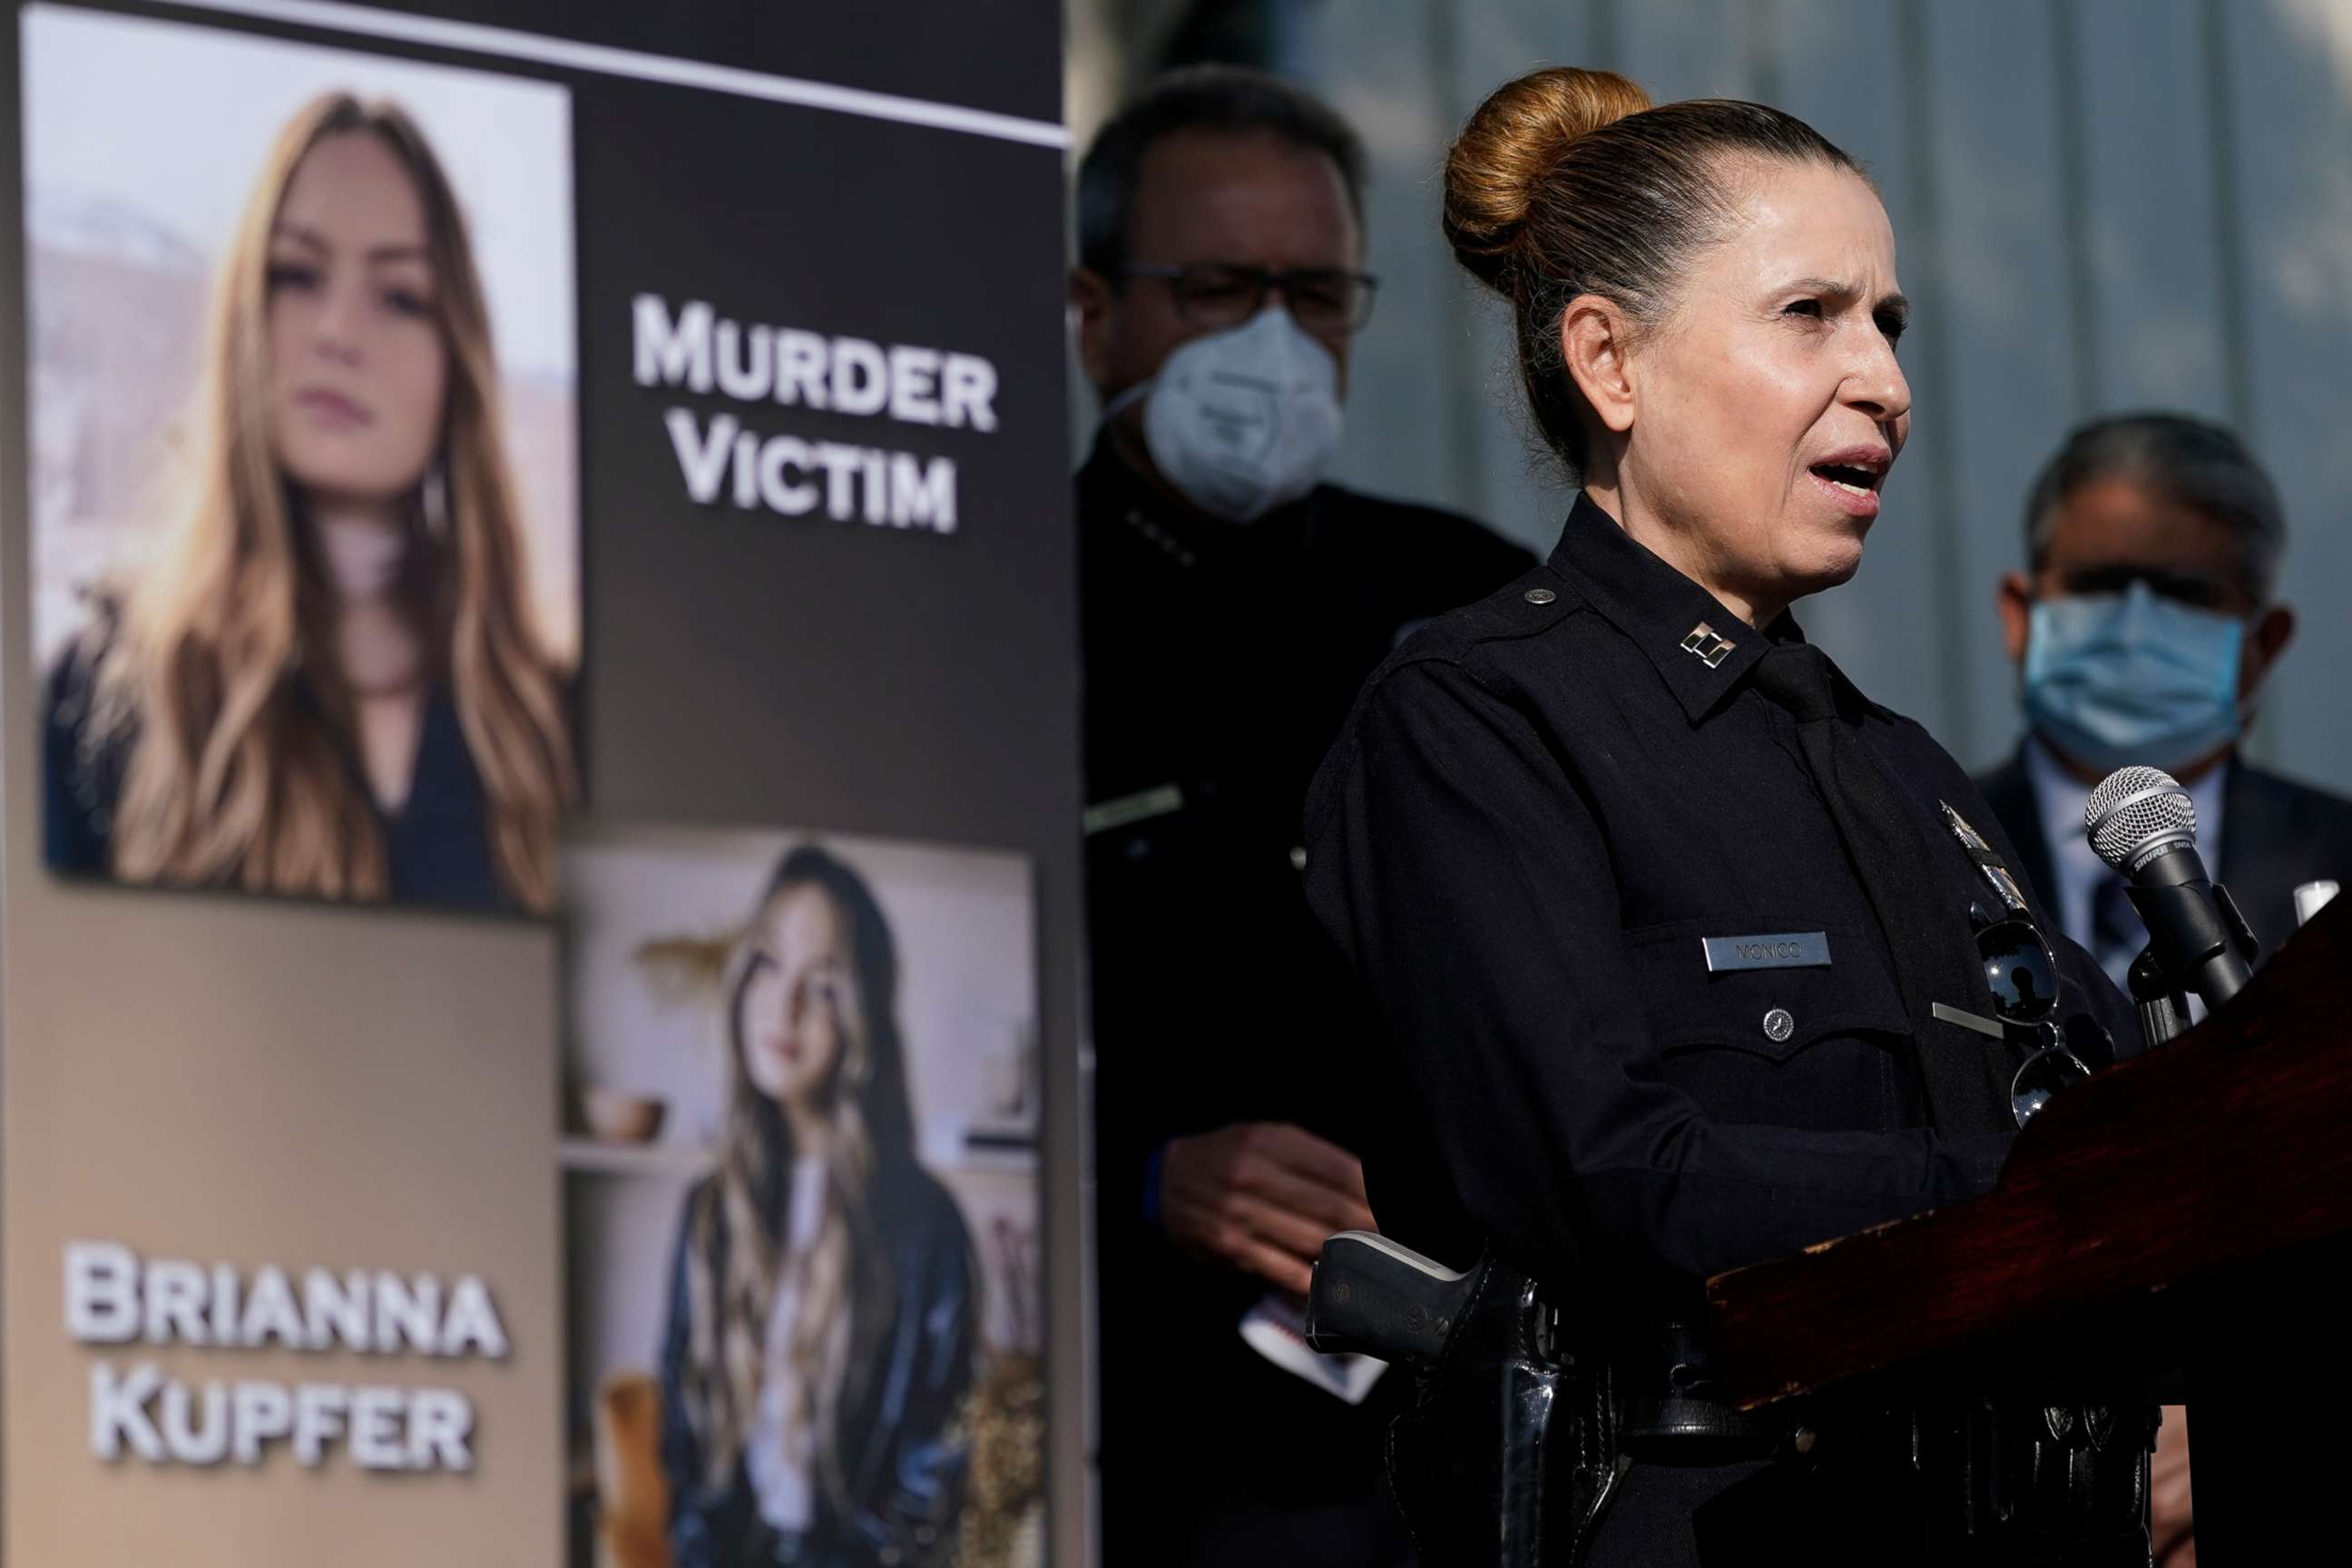 PHOTO: Los Angeles Police Department Capt. Sonia Monico speaks at a news conference about Brianna Kupfer, Jan. 18, 2022, in Los Angeles.